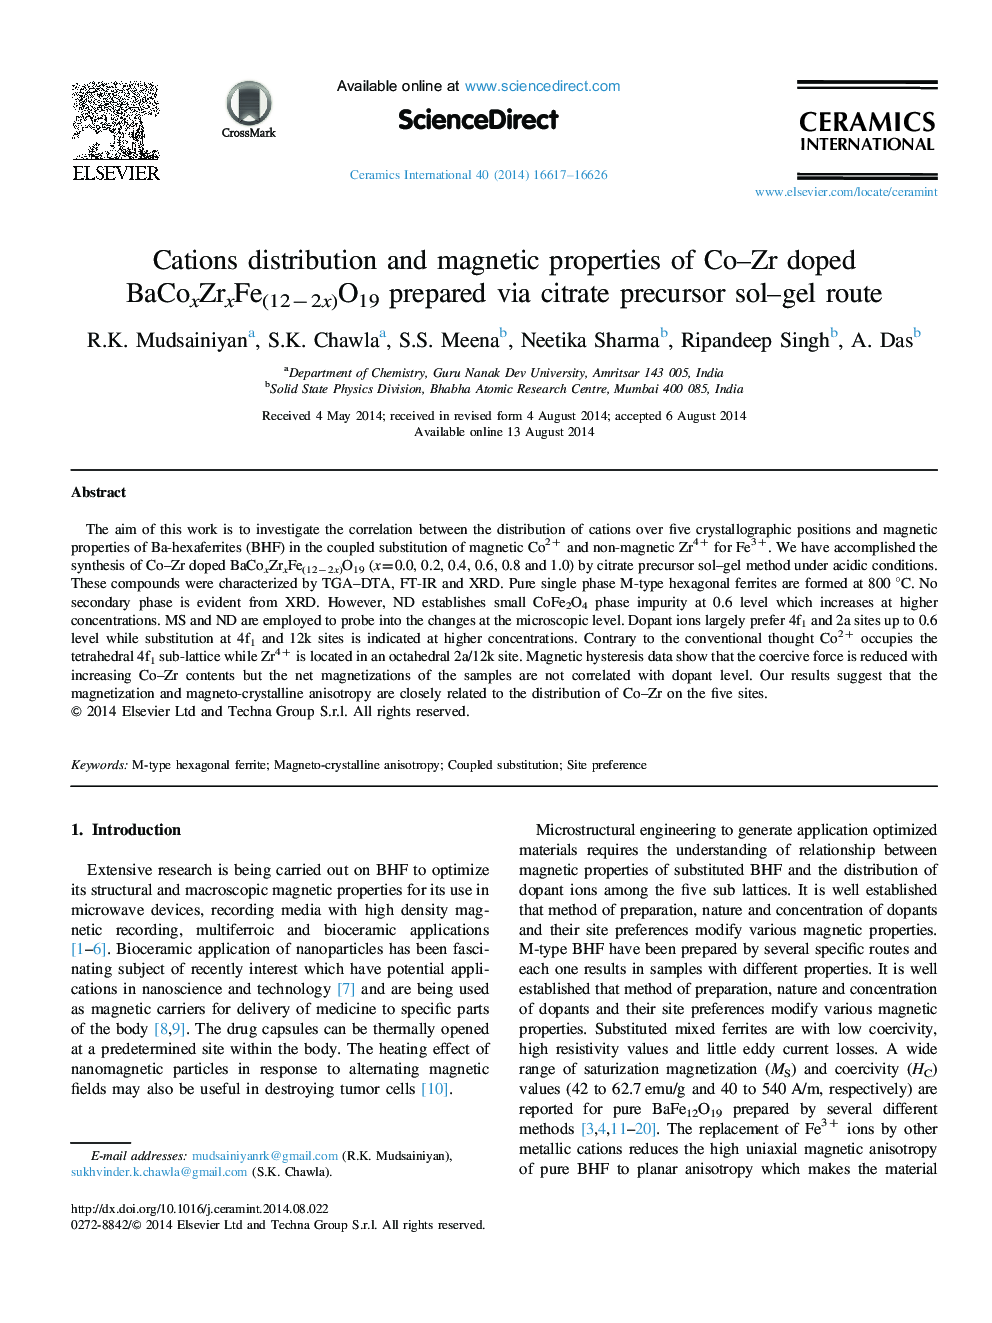 Cations distribution and magnetic properties of Co–Zr doped BaCoxZrxFe(12−2x)O19 prepared via citrate precursor sol–gel route